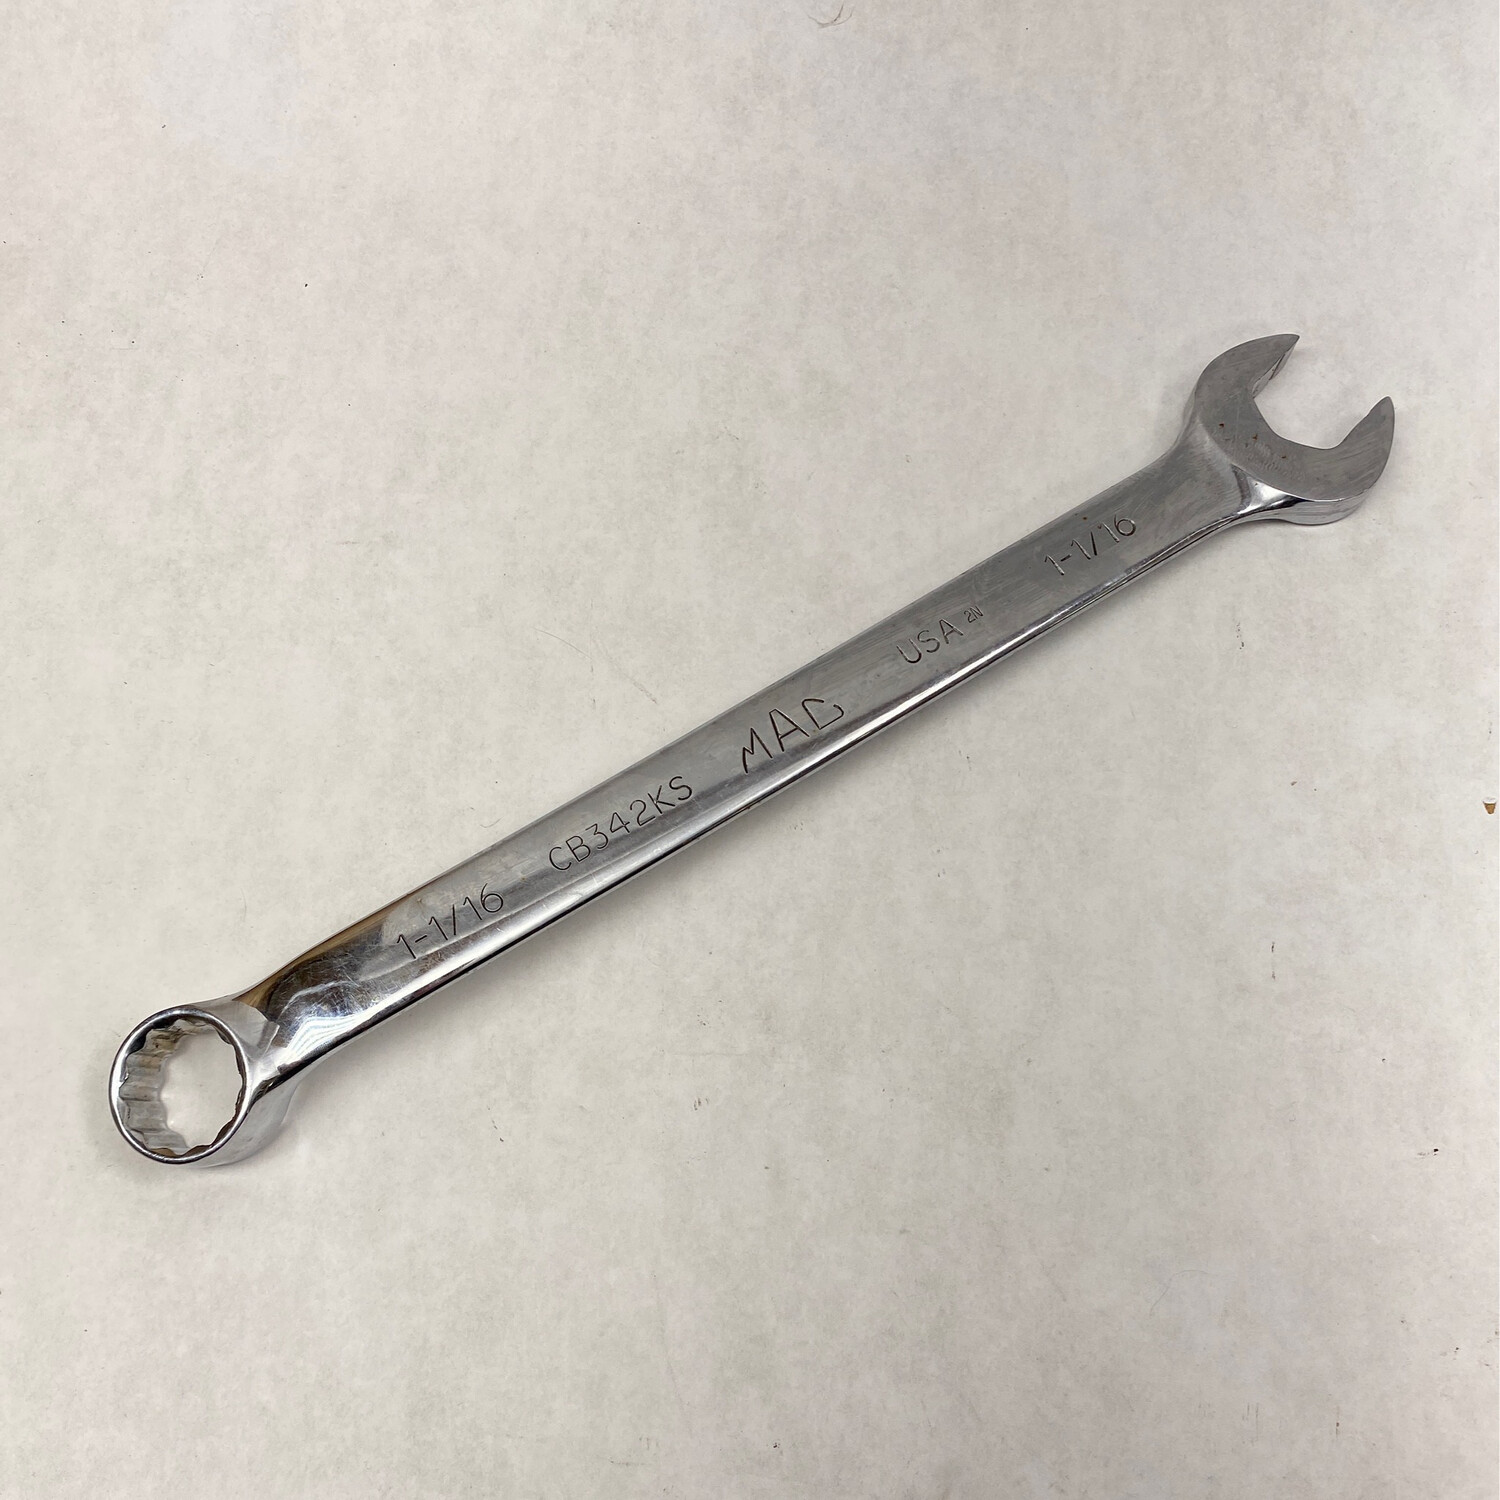 Mac Tools Knuckle Saver 12 Pt. Combination Wrench 1 1/16”, CB342KS